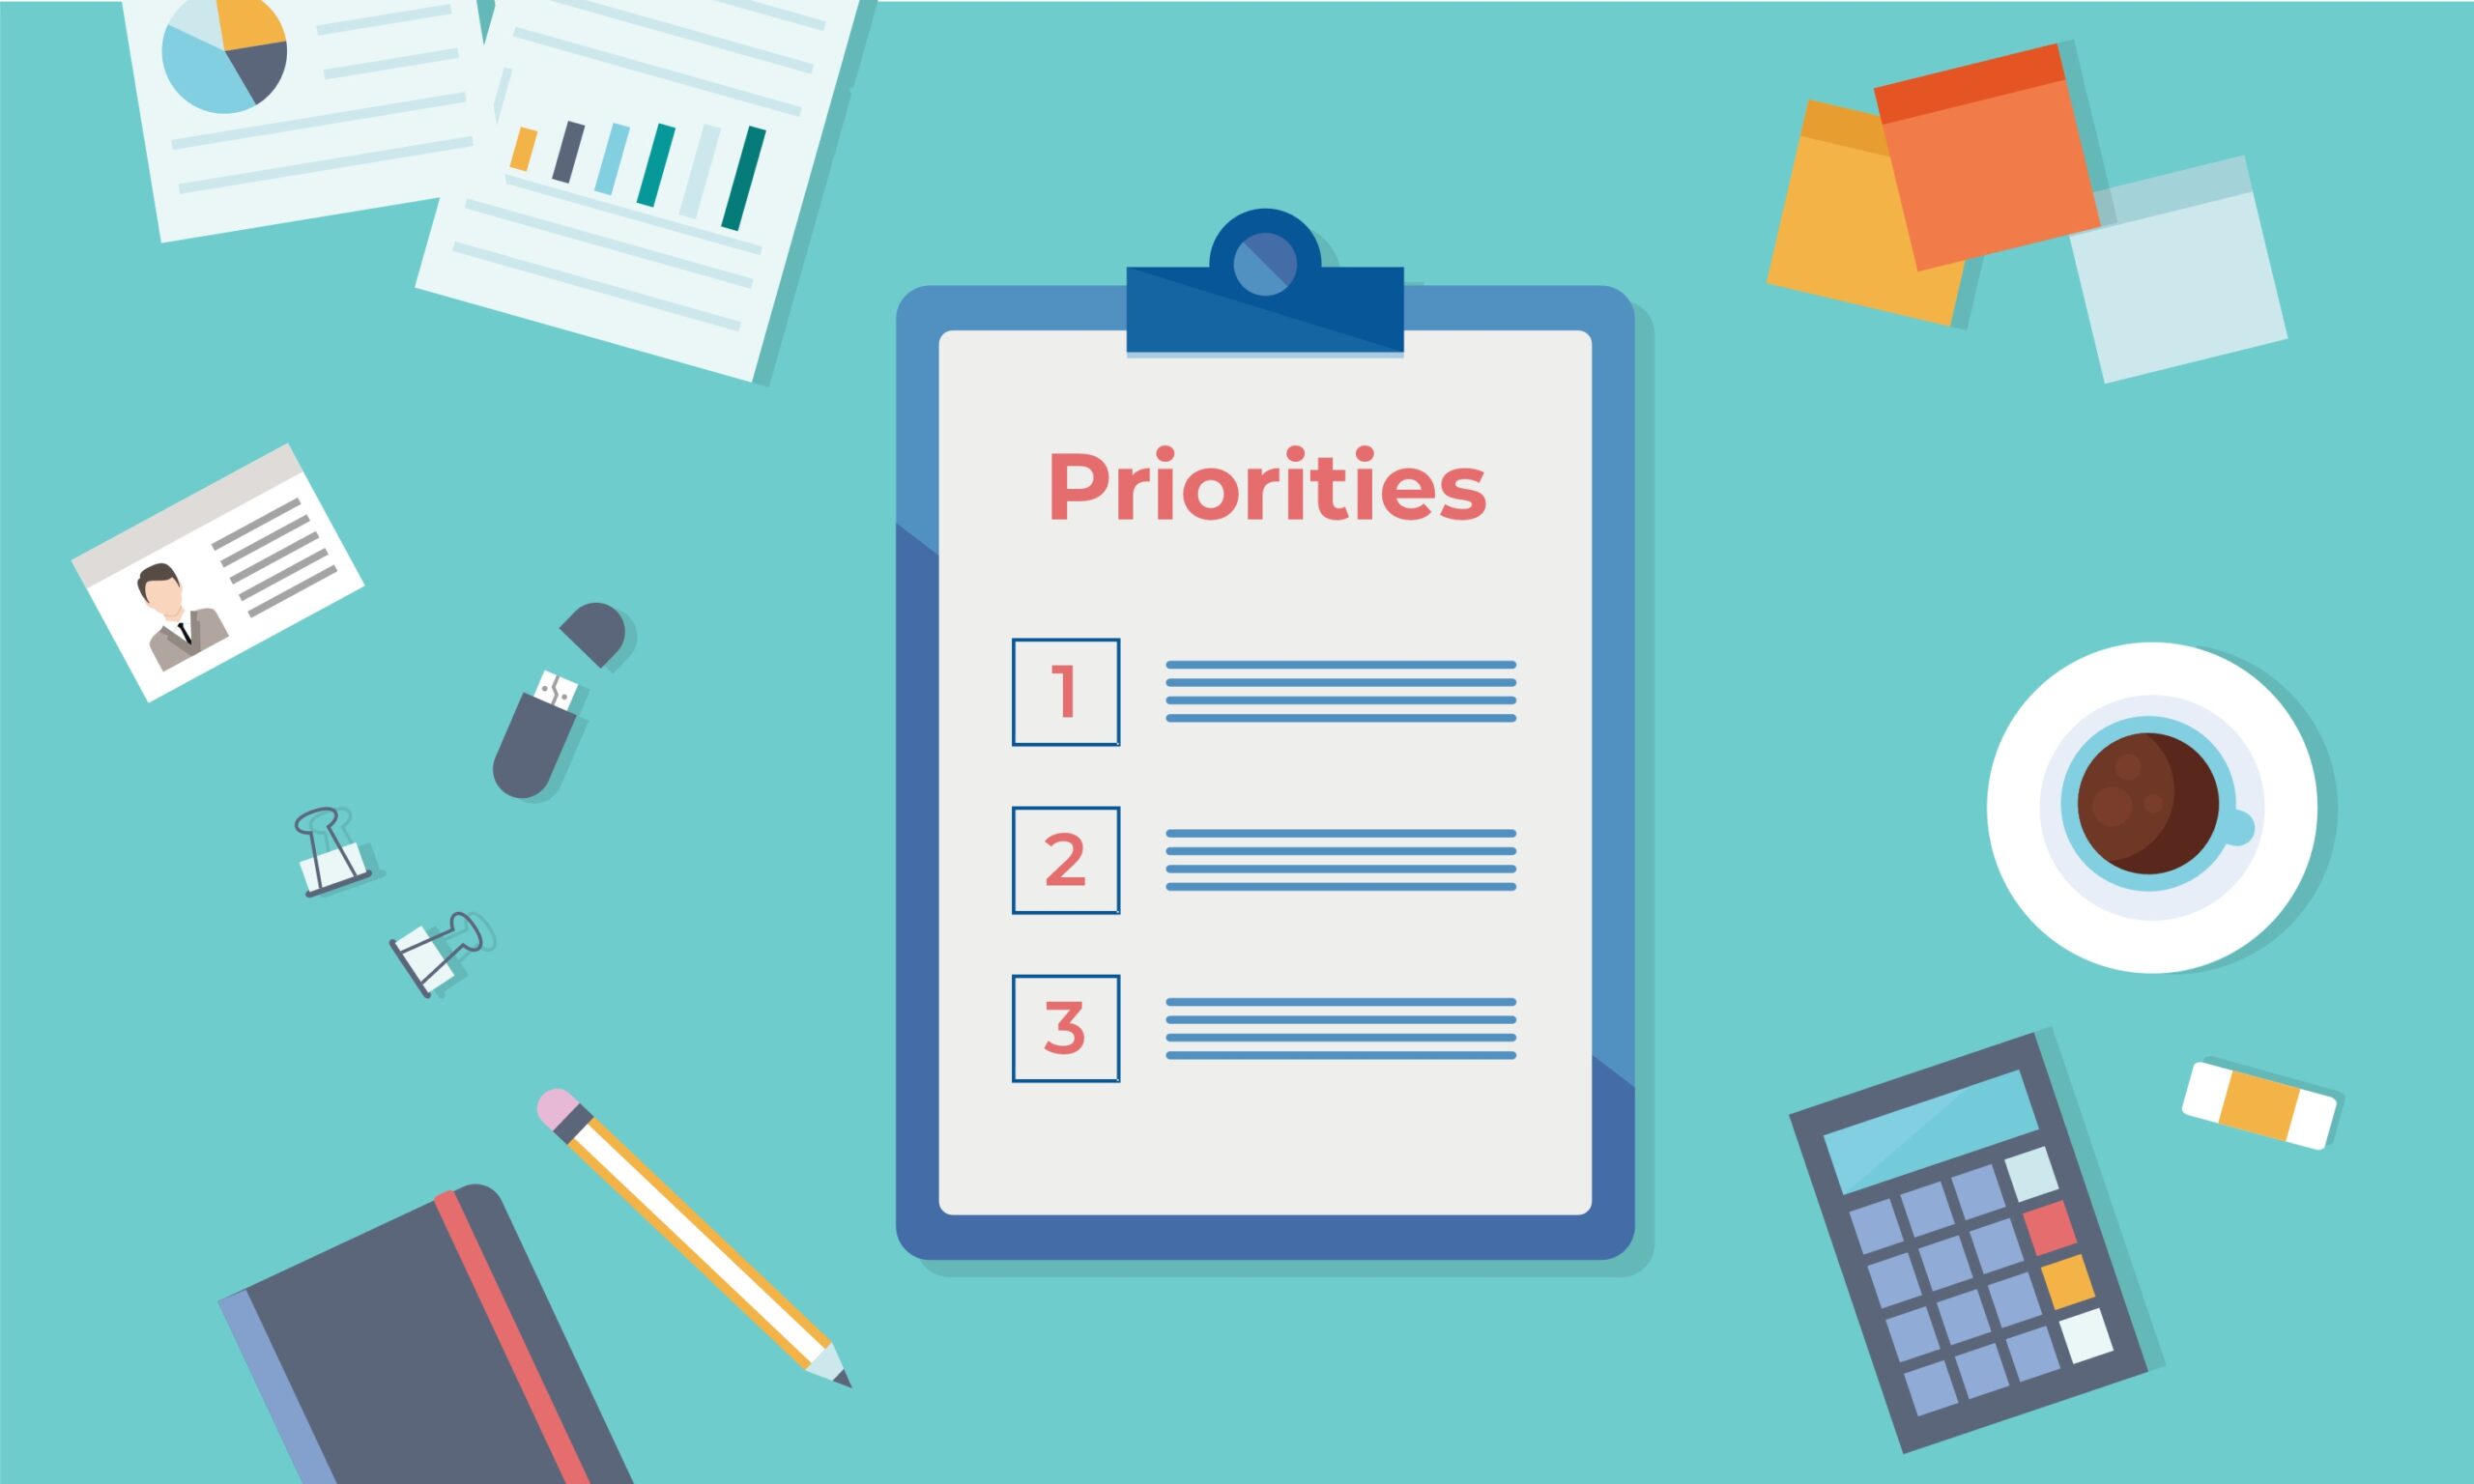 product prioritisation - how to improve it using FDM model